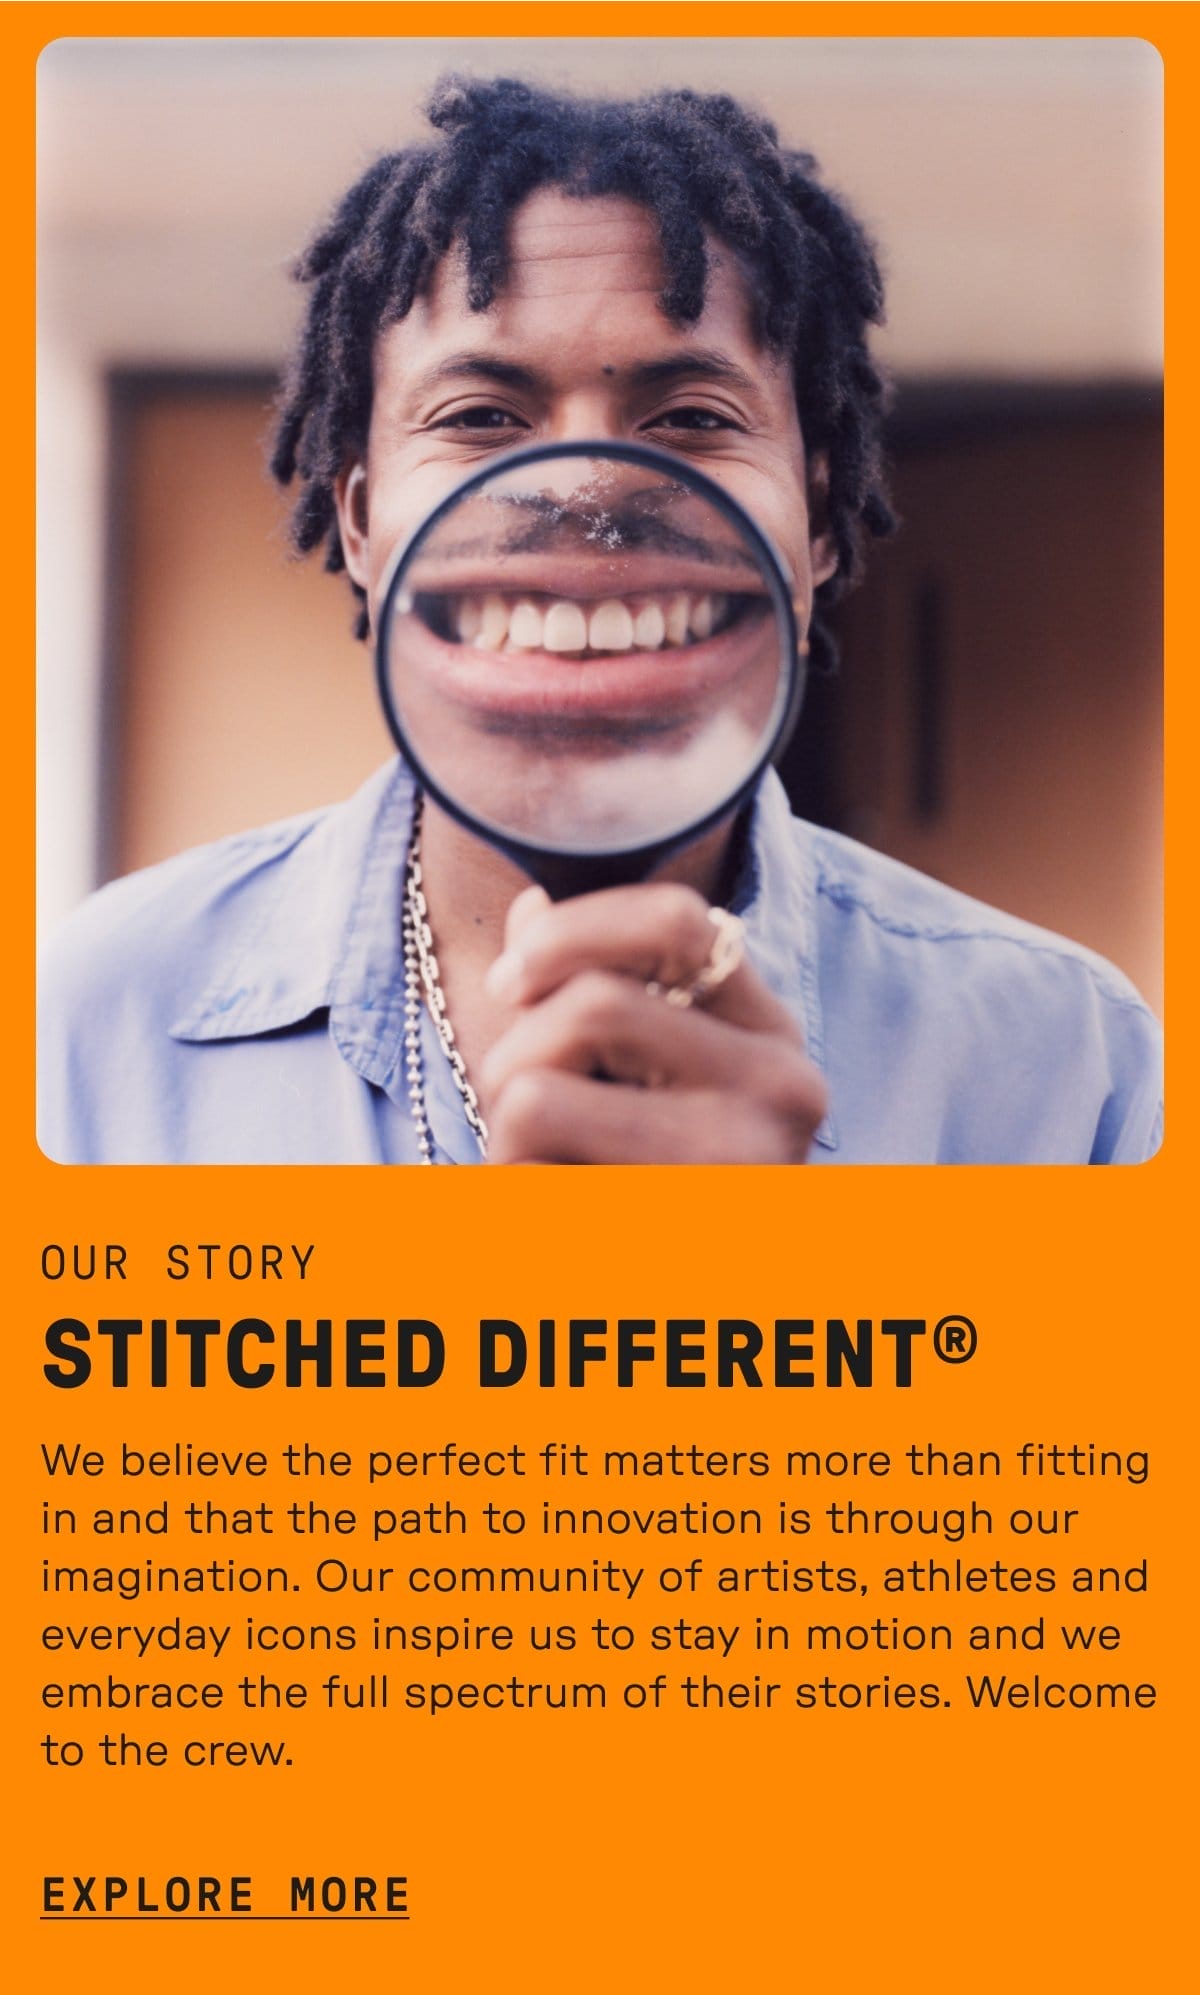 Stitched Different